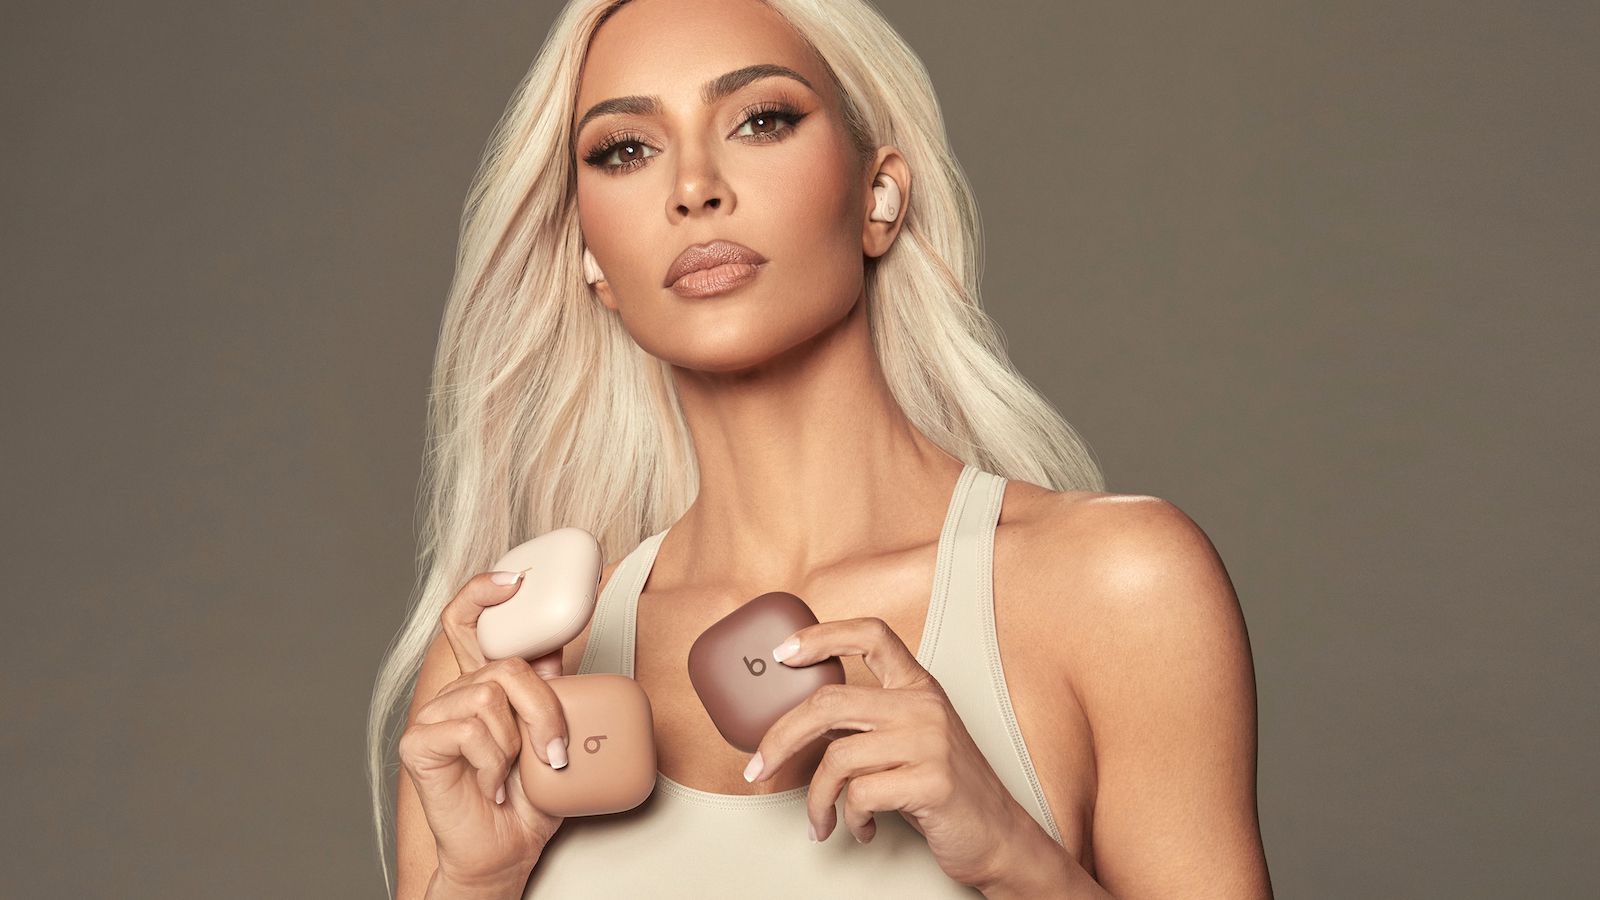 Beats Fit Pro Now Available to Order in Kim Kardashian's New Colors